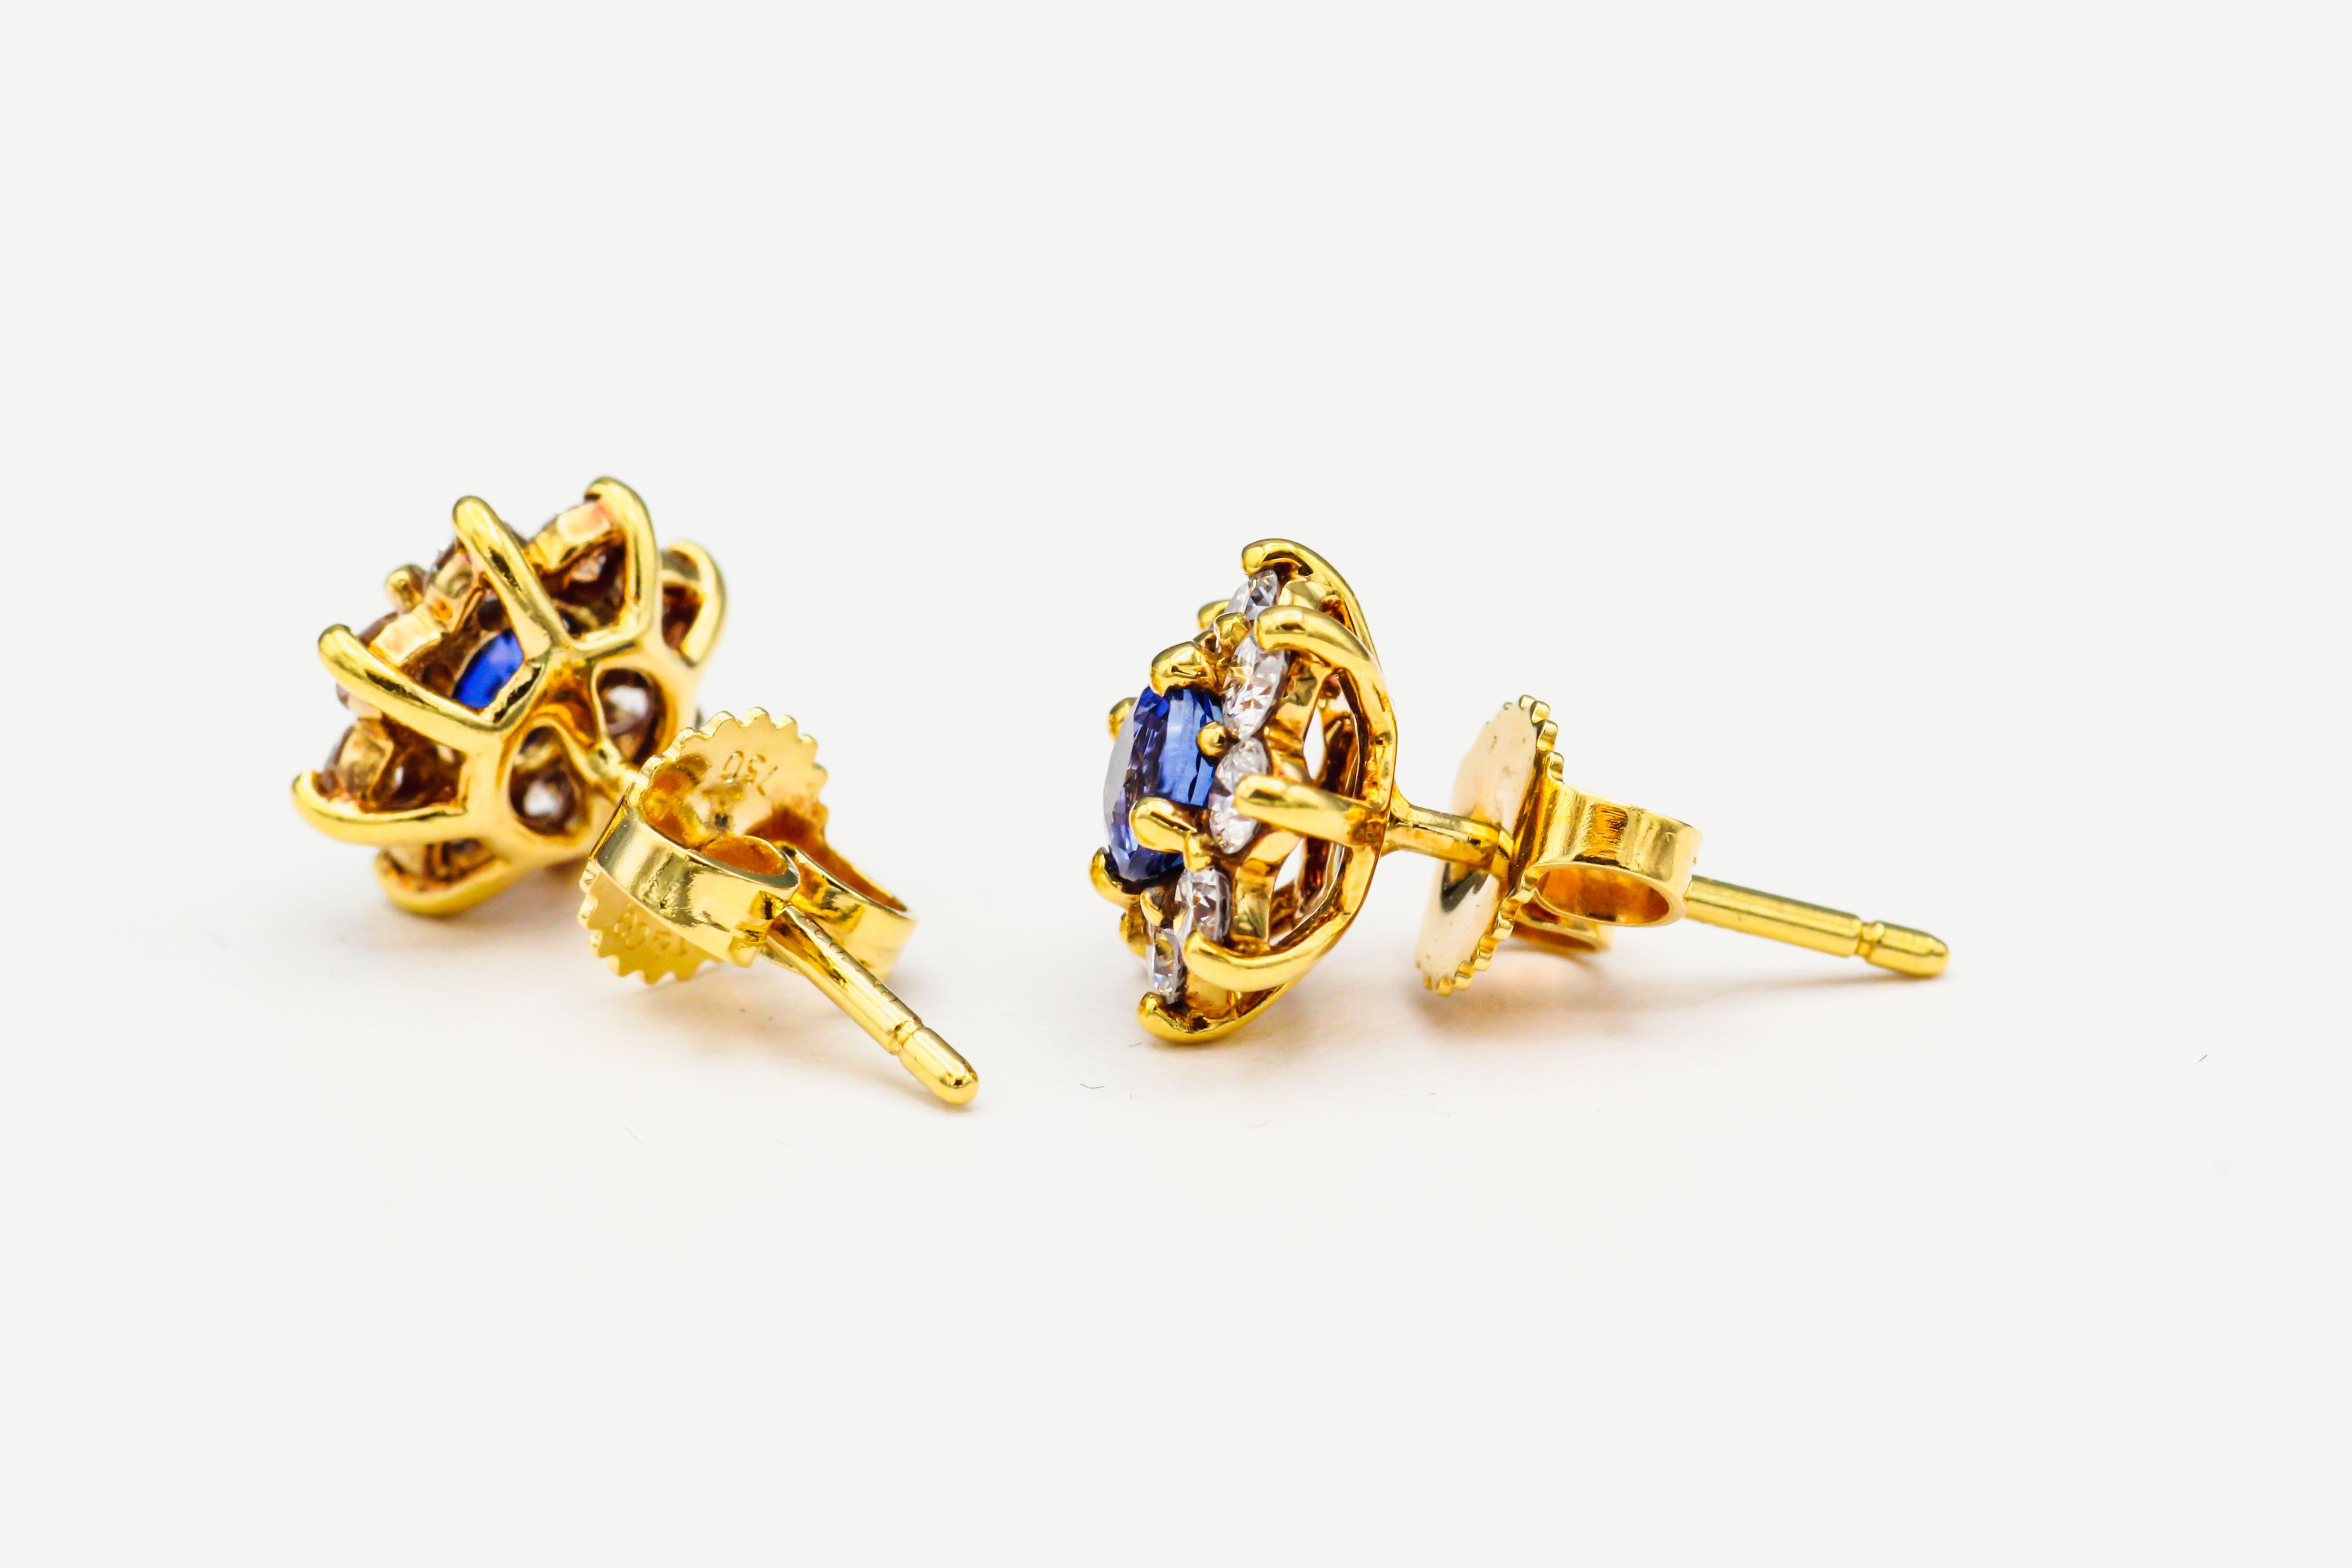 Fine pair of sapphire, diamond,  and 18K gold earrings, by Tiffany & Co. circa 1980s.  They features approx. 0.33 cts of high quality brilliant-cut diamonds and approx 0.7 carats of rich blue round cut sapphires.

These Tiffany & Co. petite sapphire